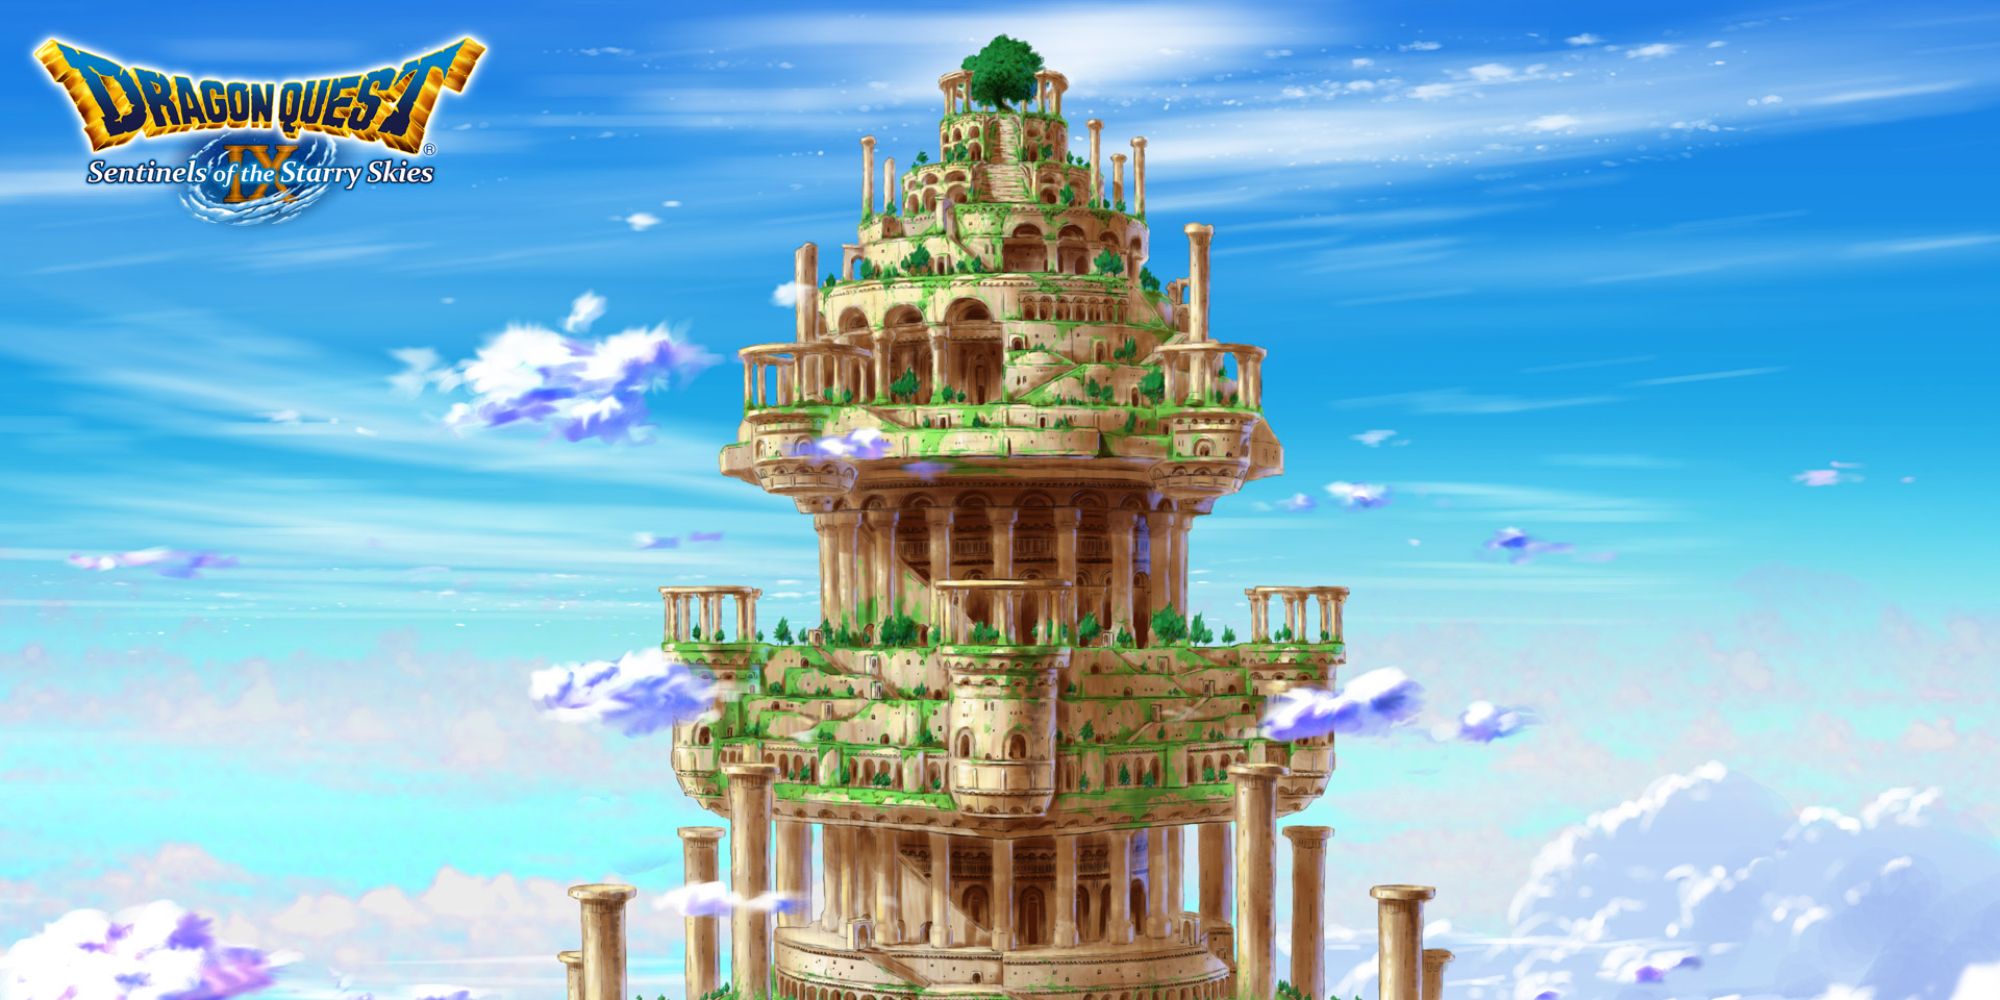 Dragon Quest concept artwork for The Observatory showing it floating in the sky surrounded by clouds